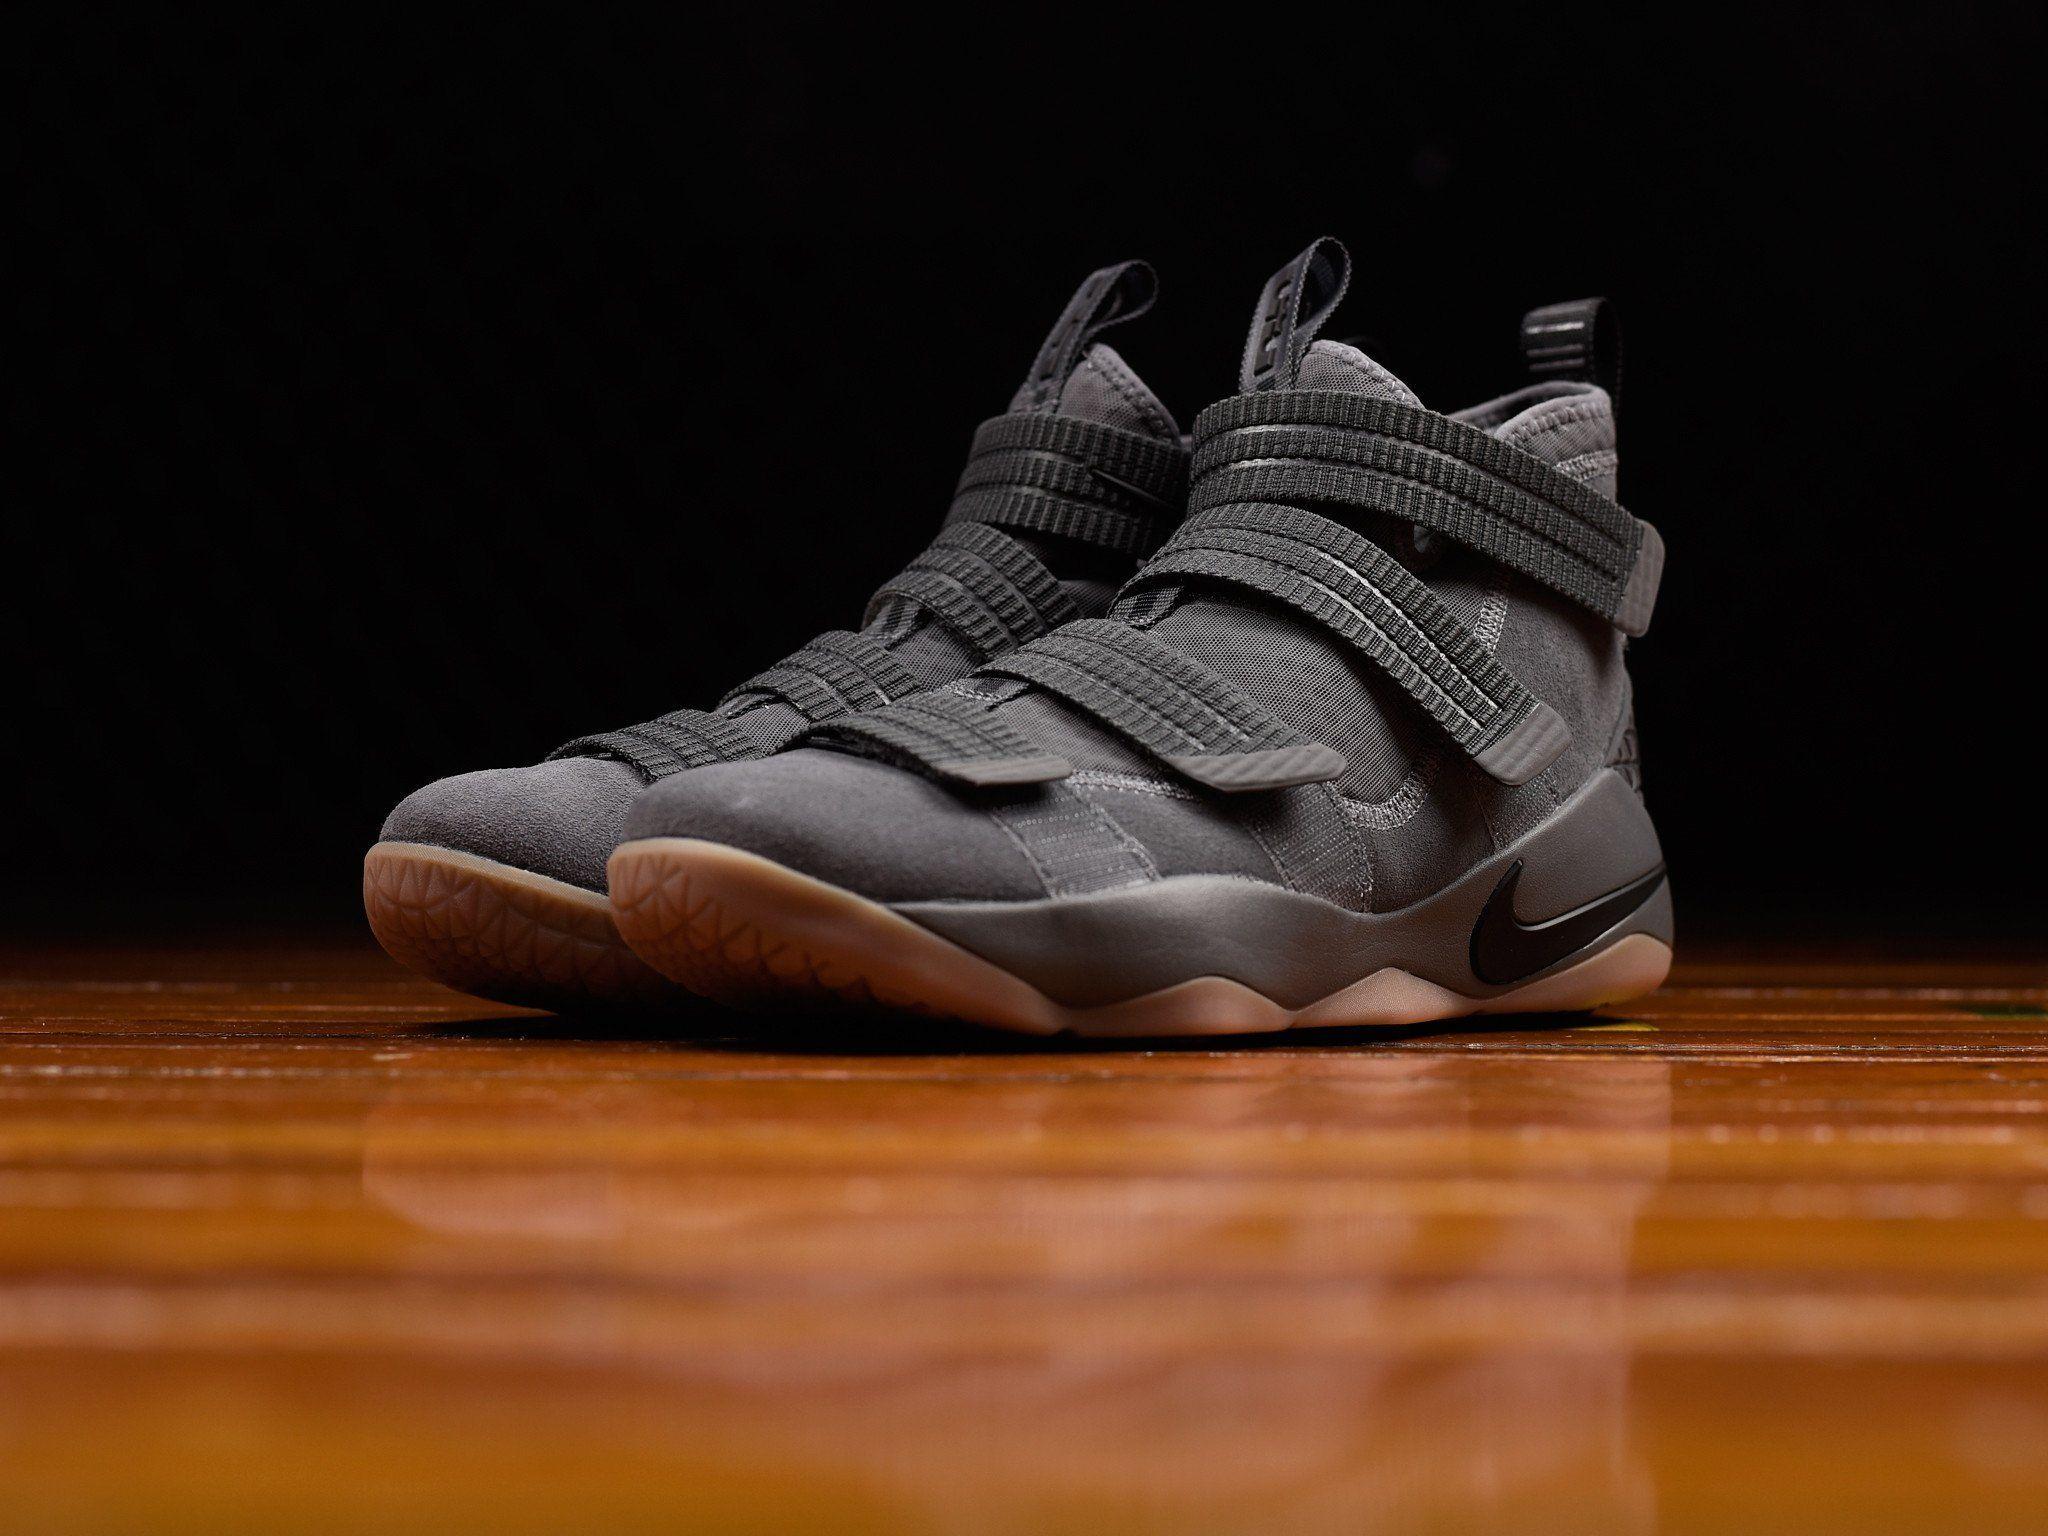 The Nike LeBron Soldier 11 has Dropped in 'Grey Gum'